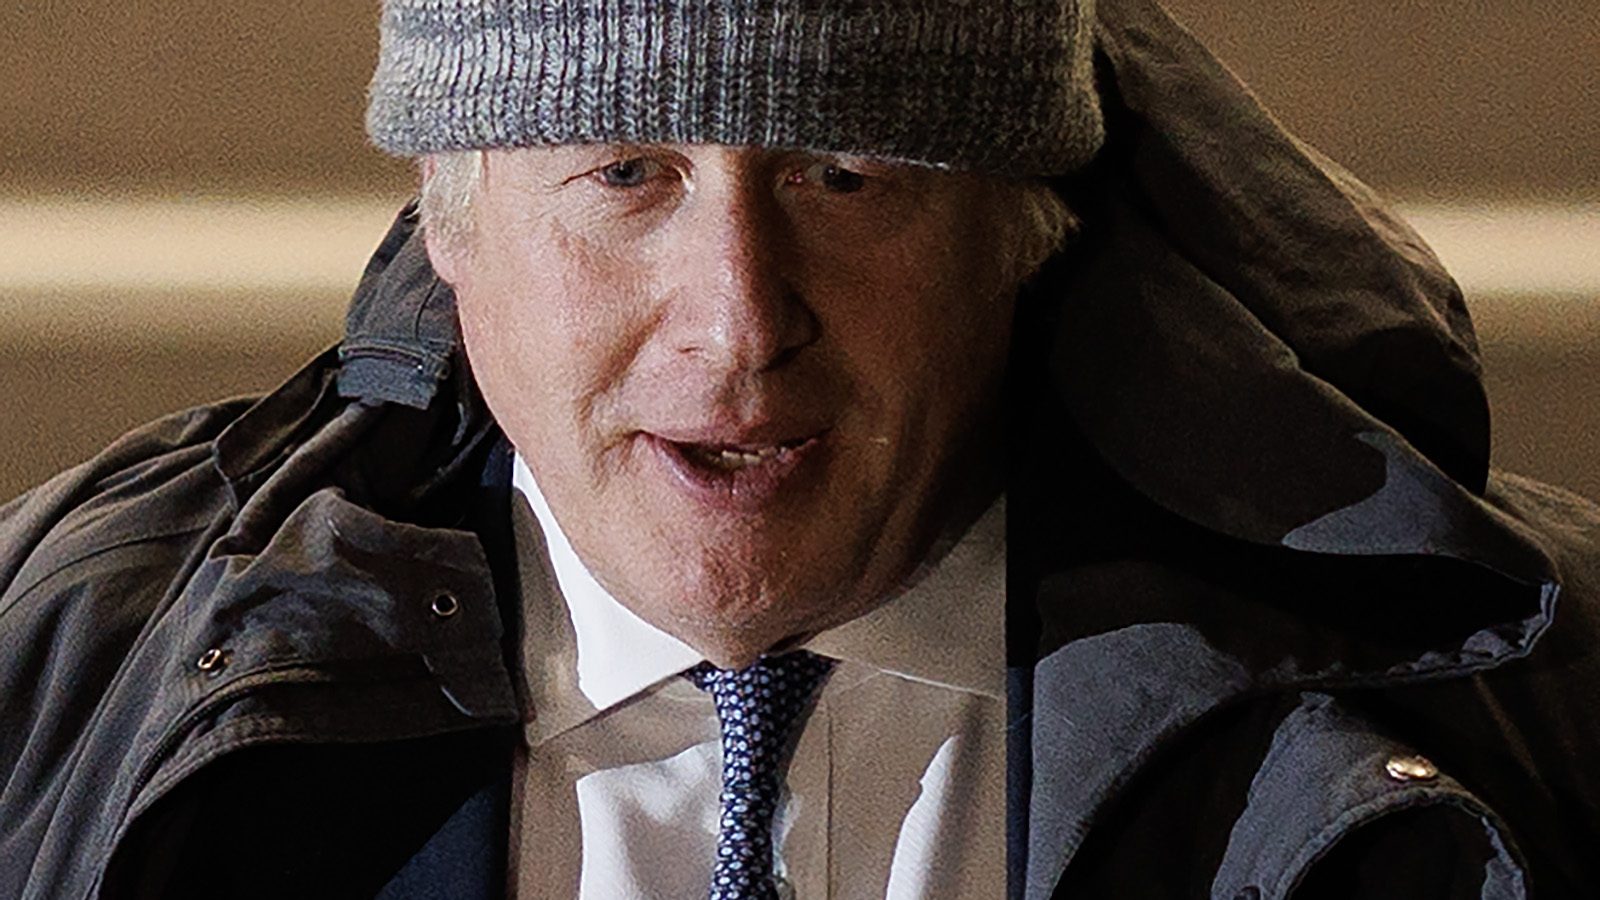 Boris Johnson leaves after testifying at the Covid Inquiry (Photo by Dan Kitwood/Getty Images)